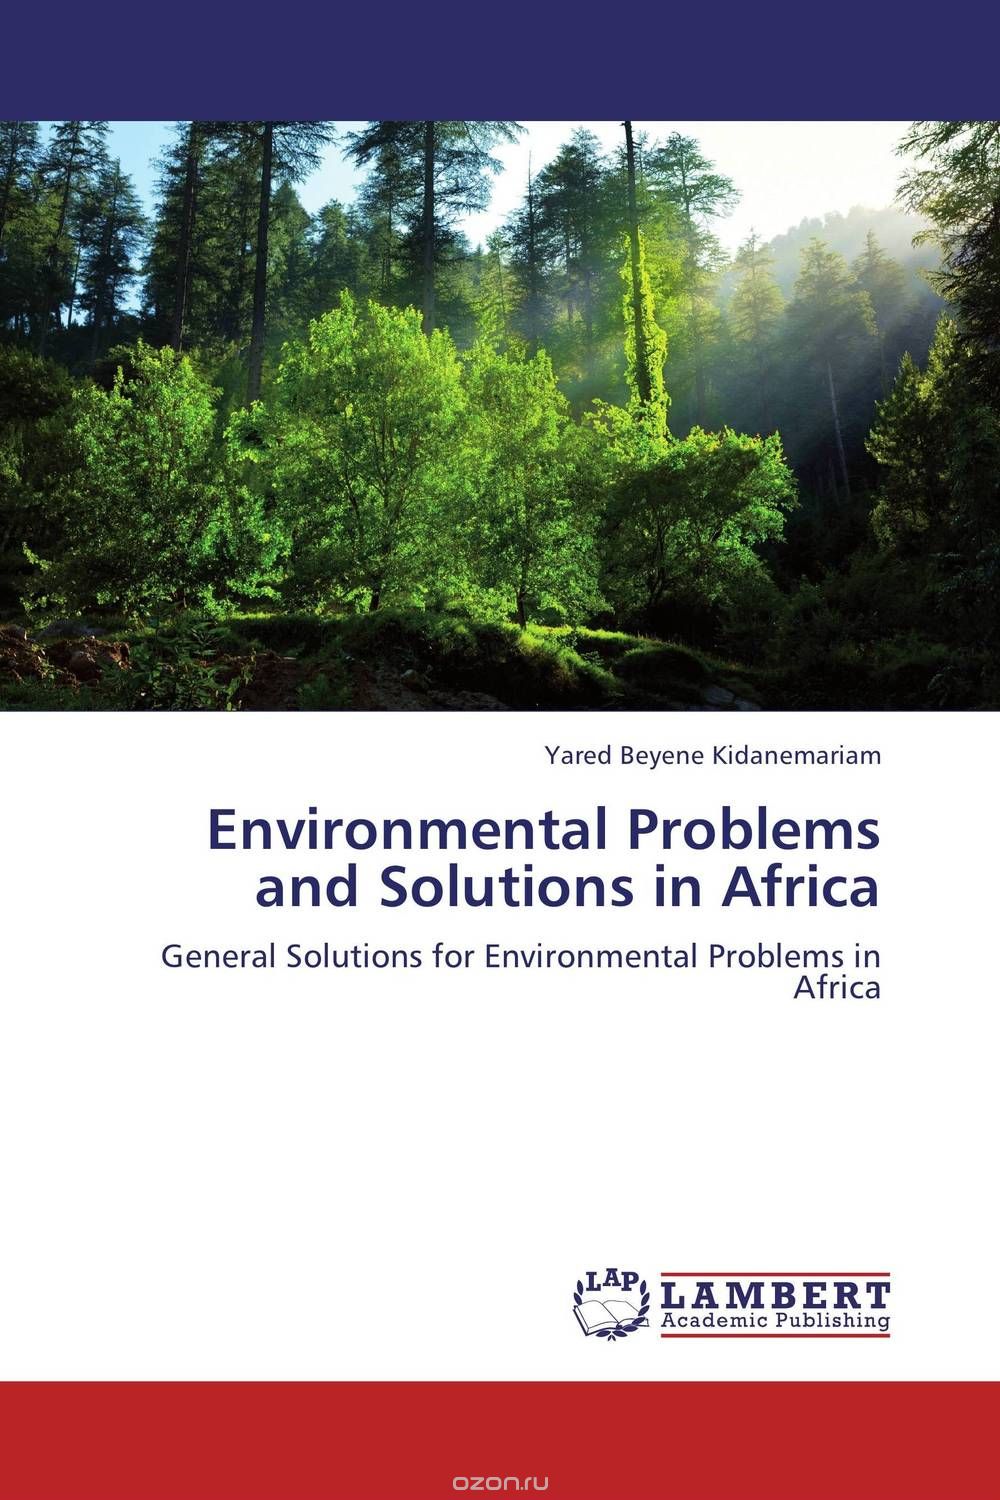 Environmental Problems and Solutions in Africa